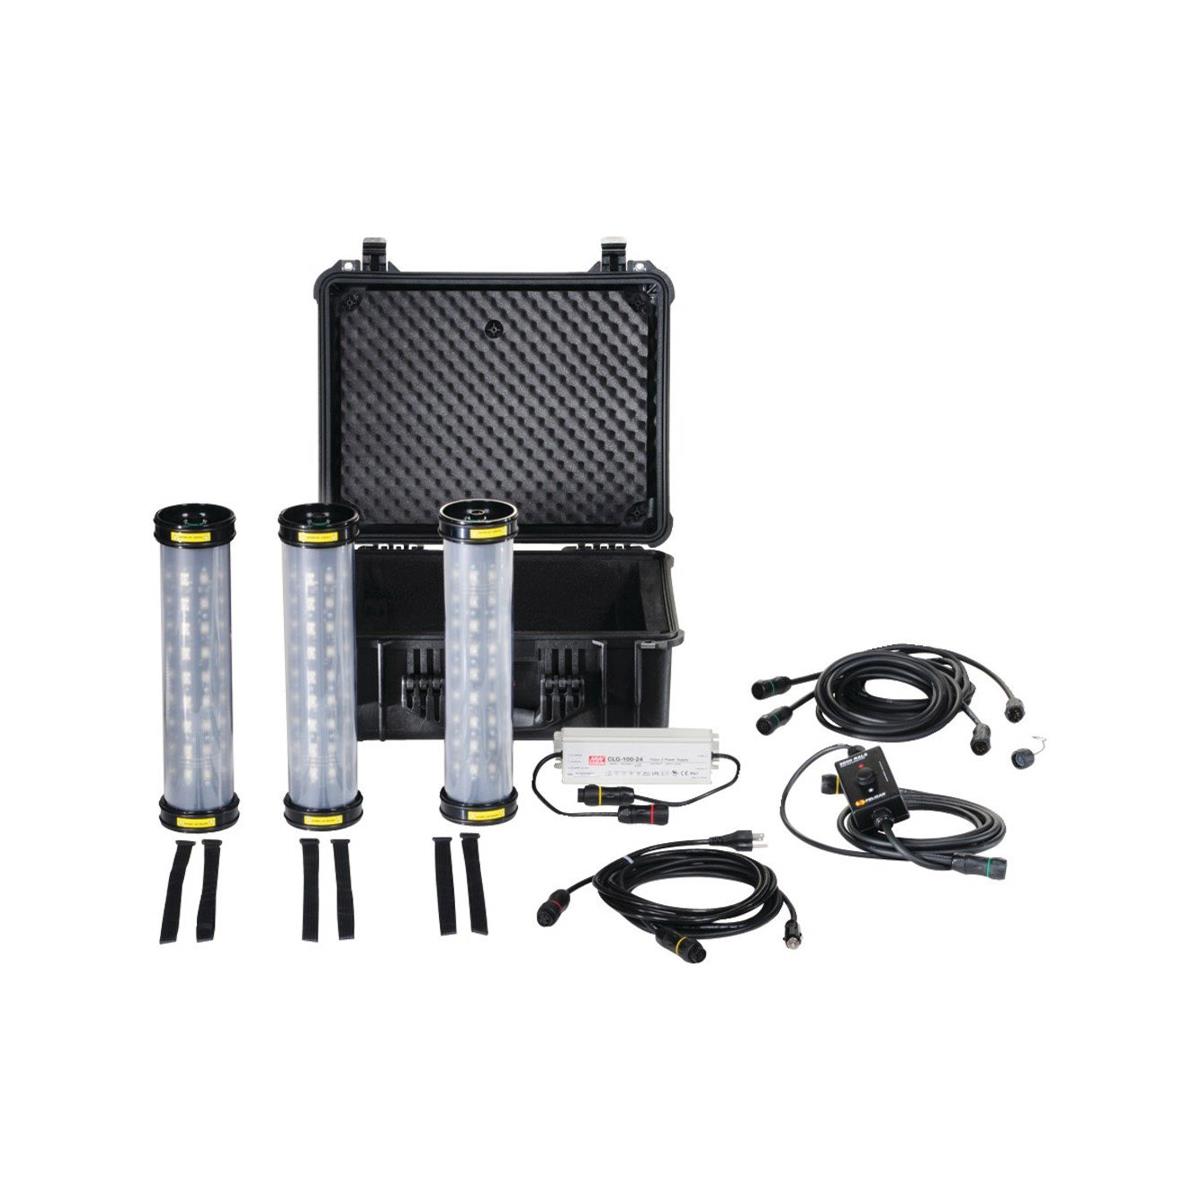 Image of Pelican 9500 Shelter Lighting System